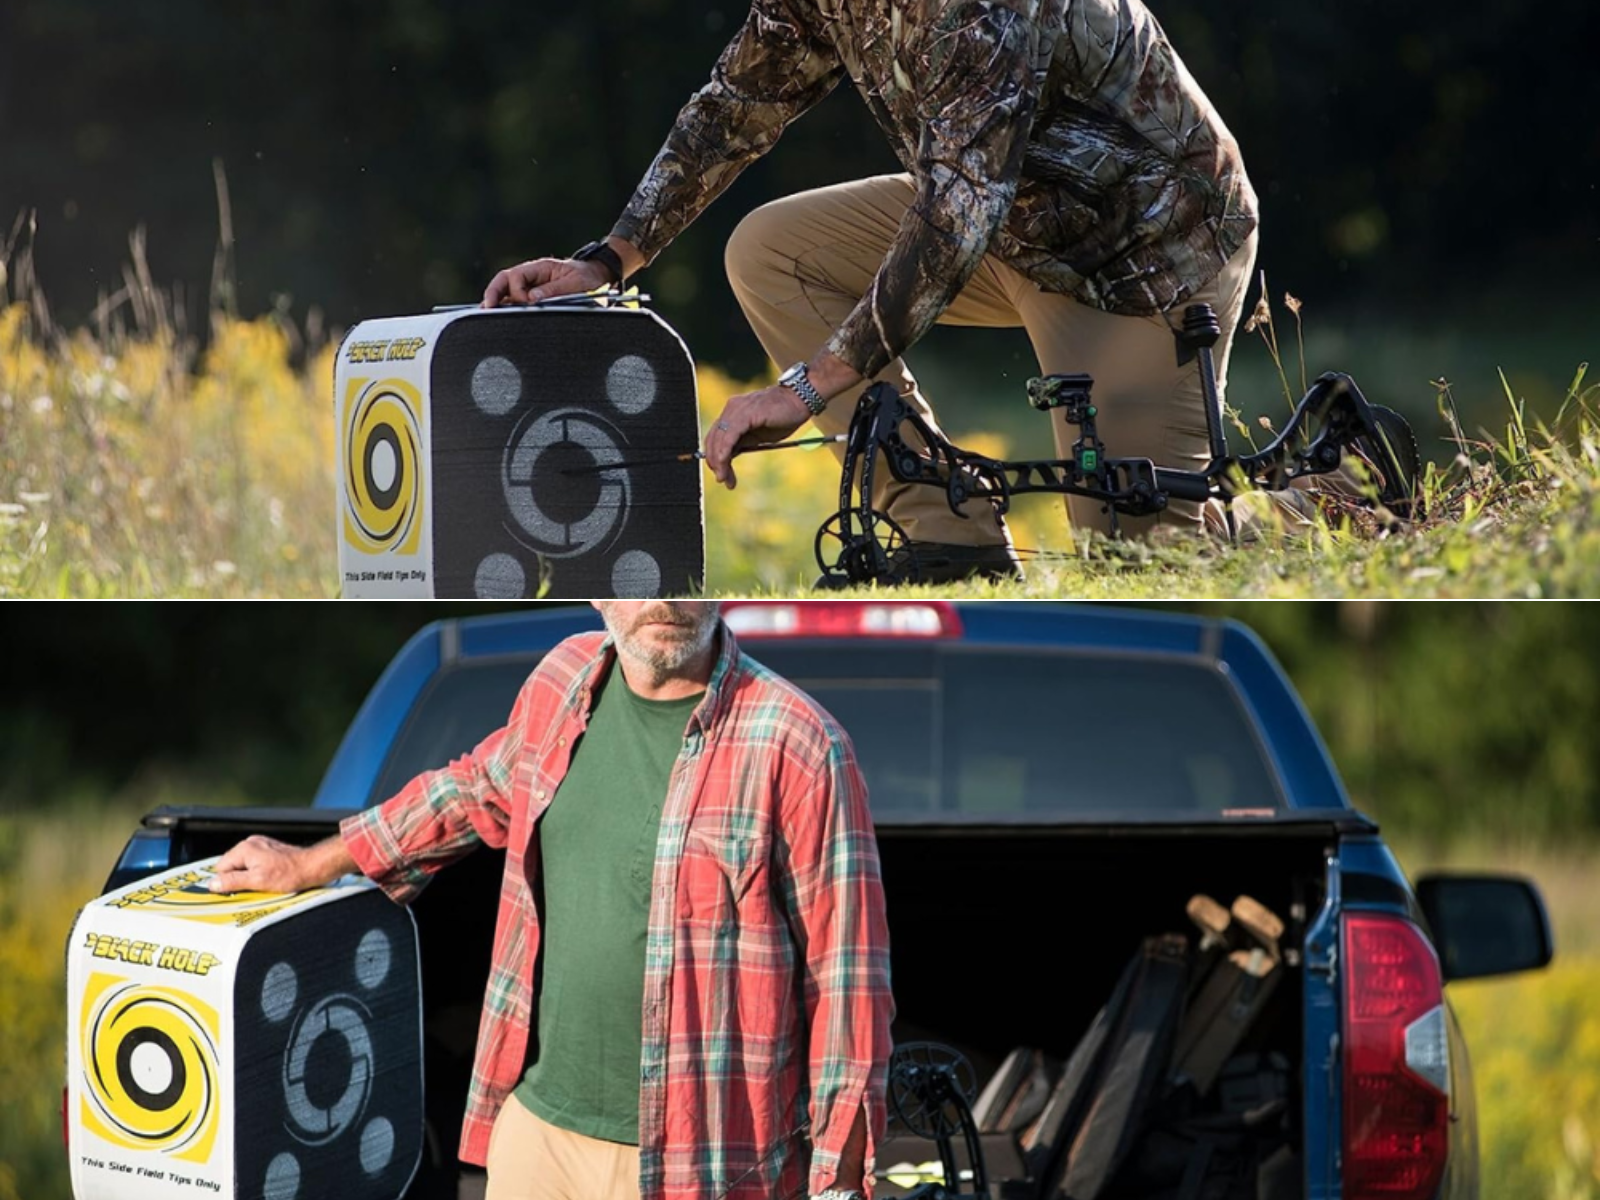 A man is removing an arrow from the archery target, and a man unloading his target from his truck.